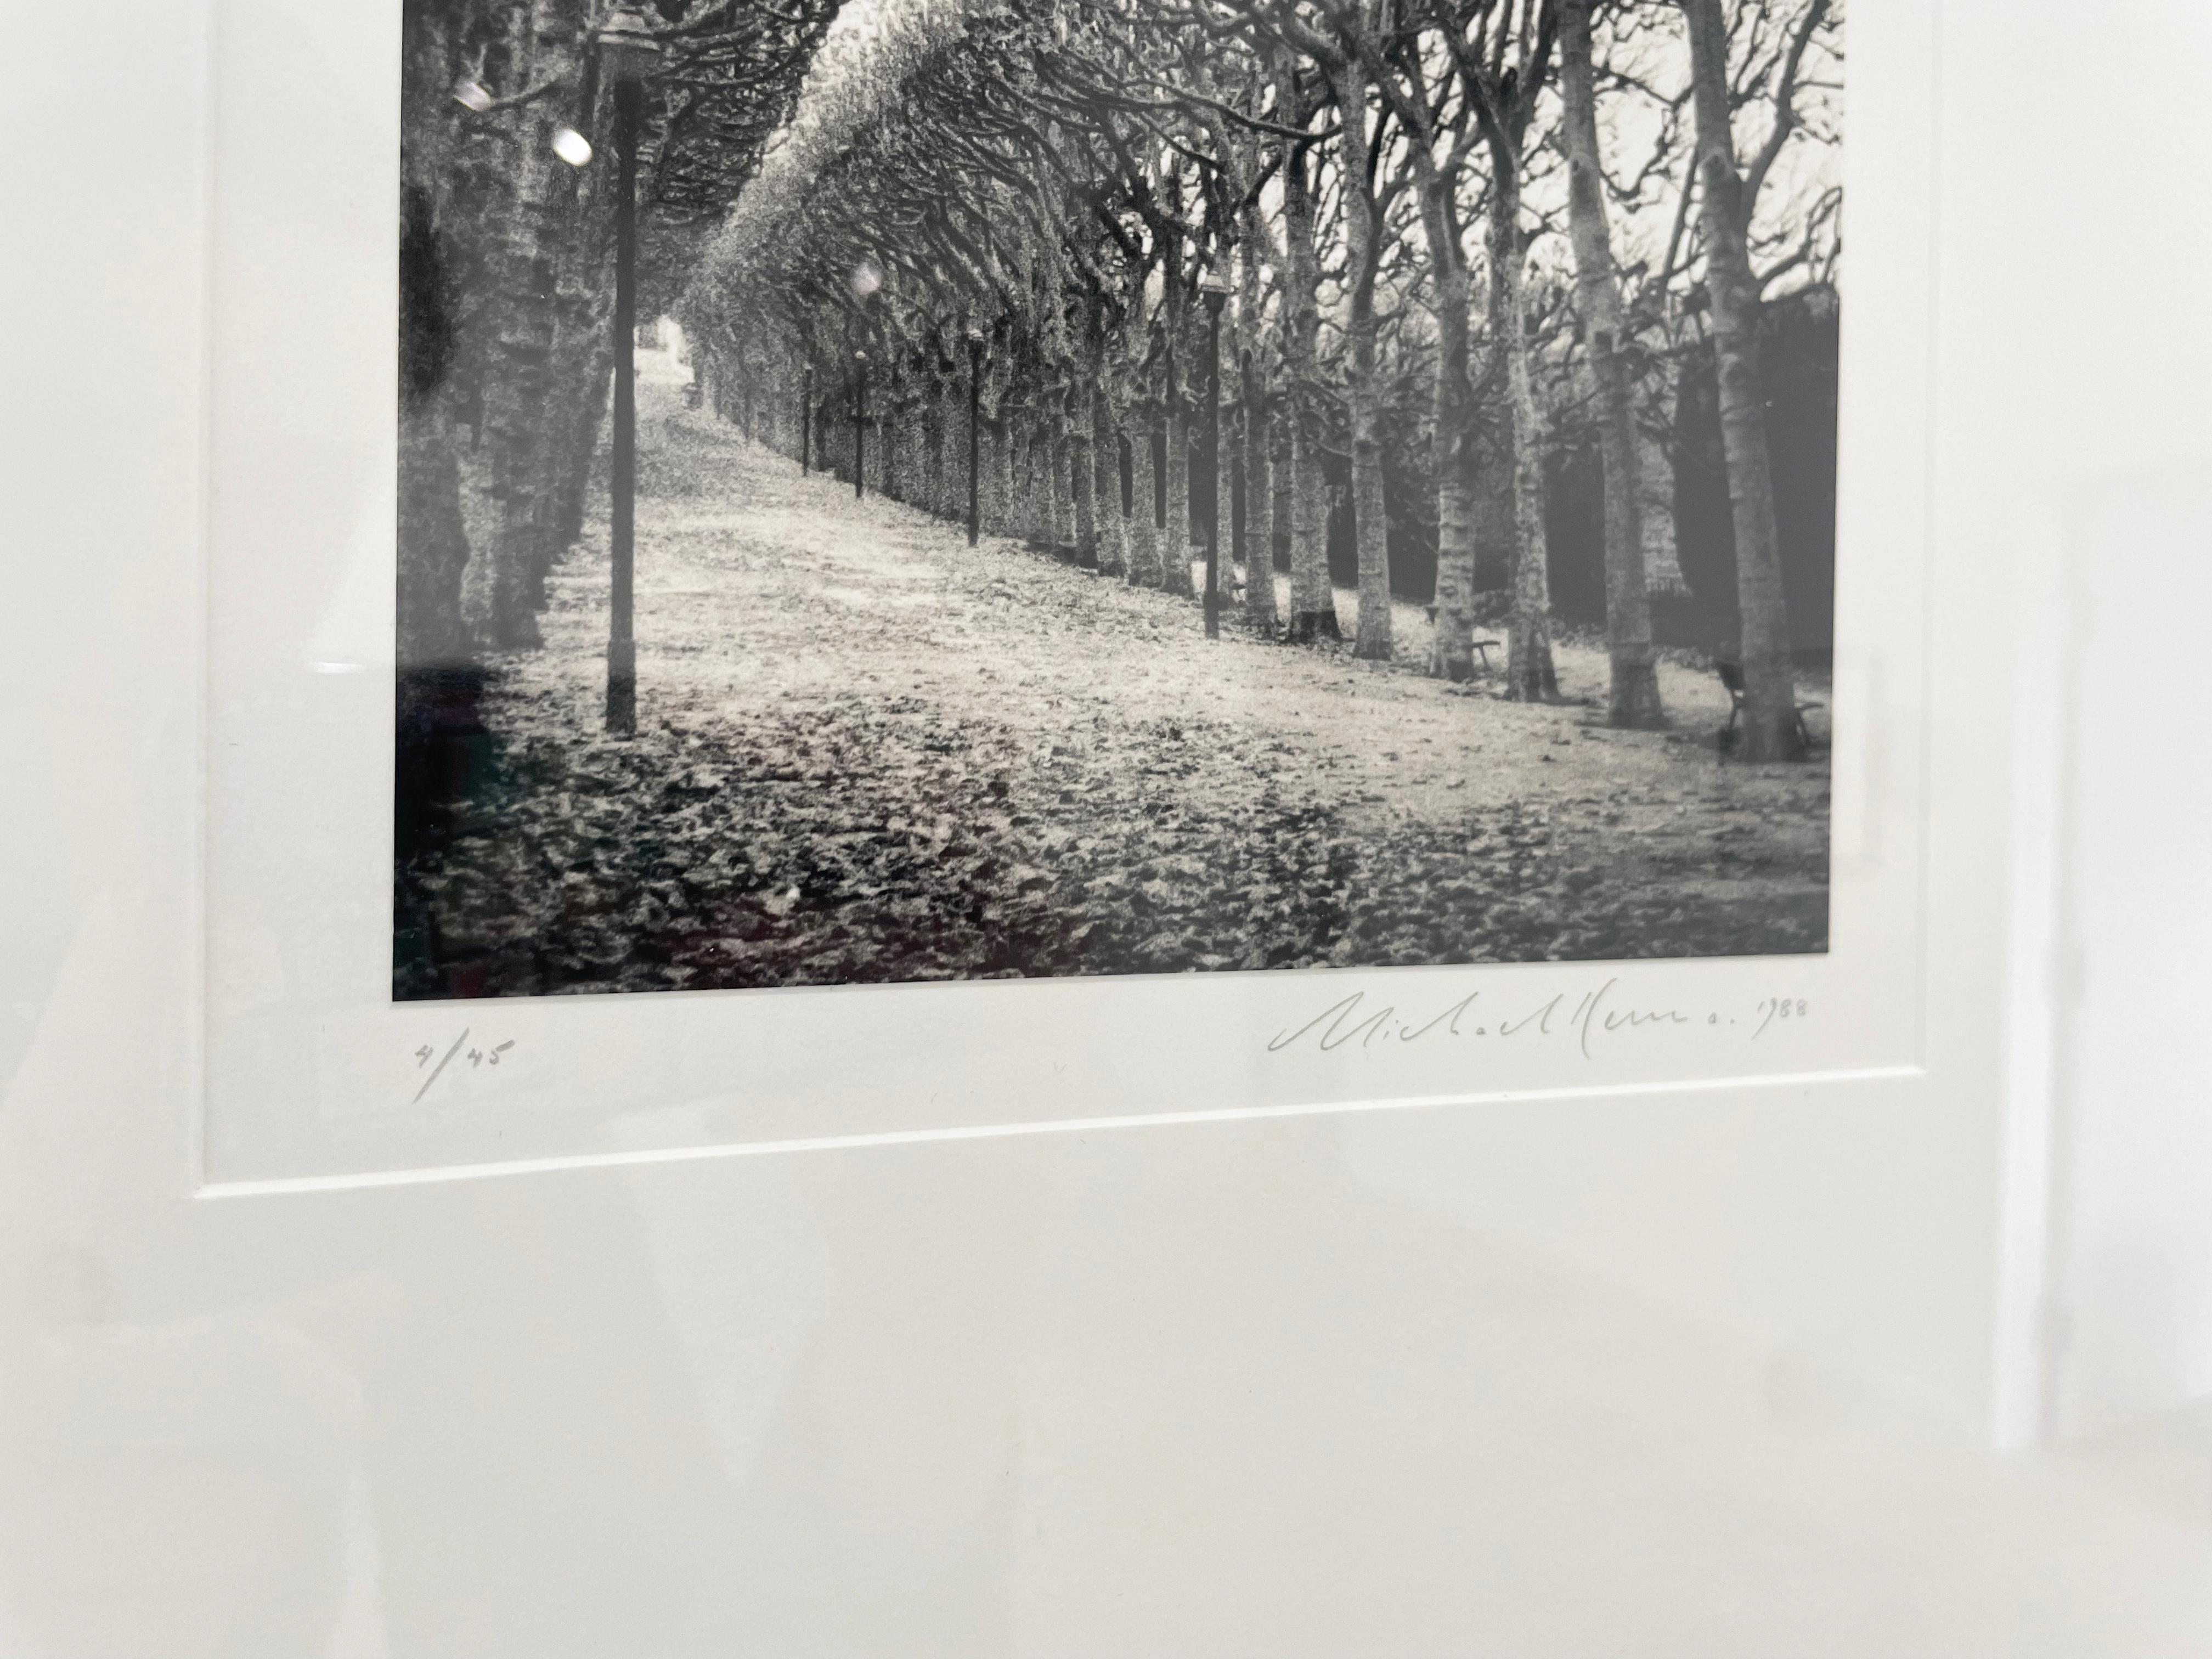 Jardin des Plantes, Study 1, Paris, France by Michael Kenna presents a tranquil scene. Tall trees with barren branches line the park road, leading back to a building in the distance.  Park benches and street lights are seen intermittently next to